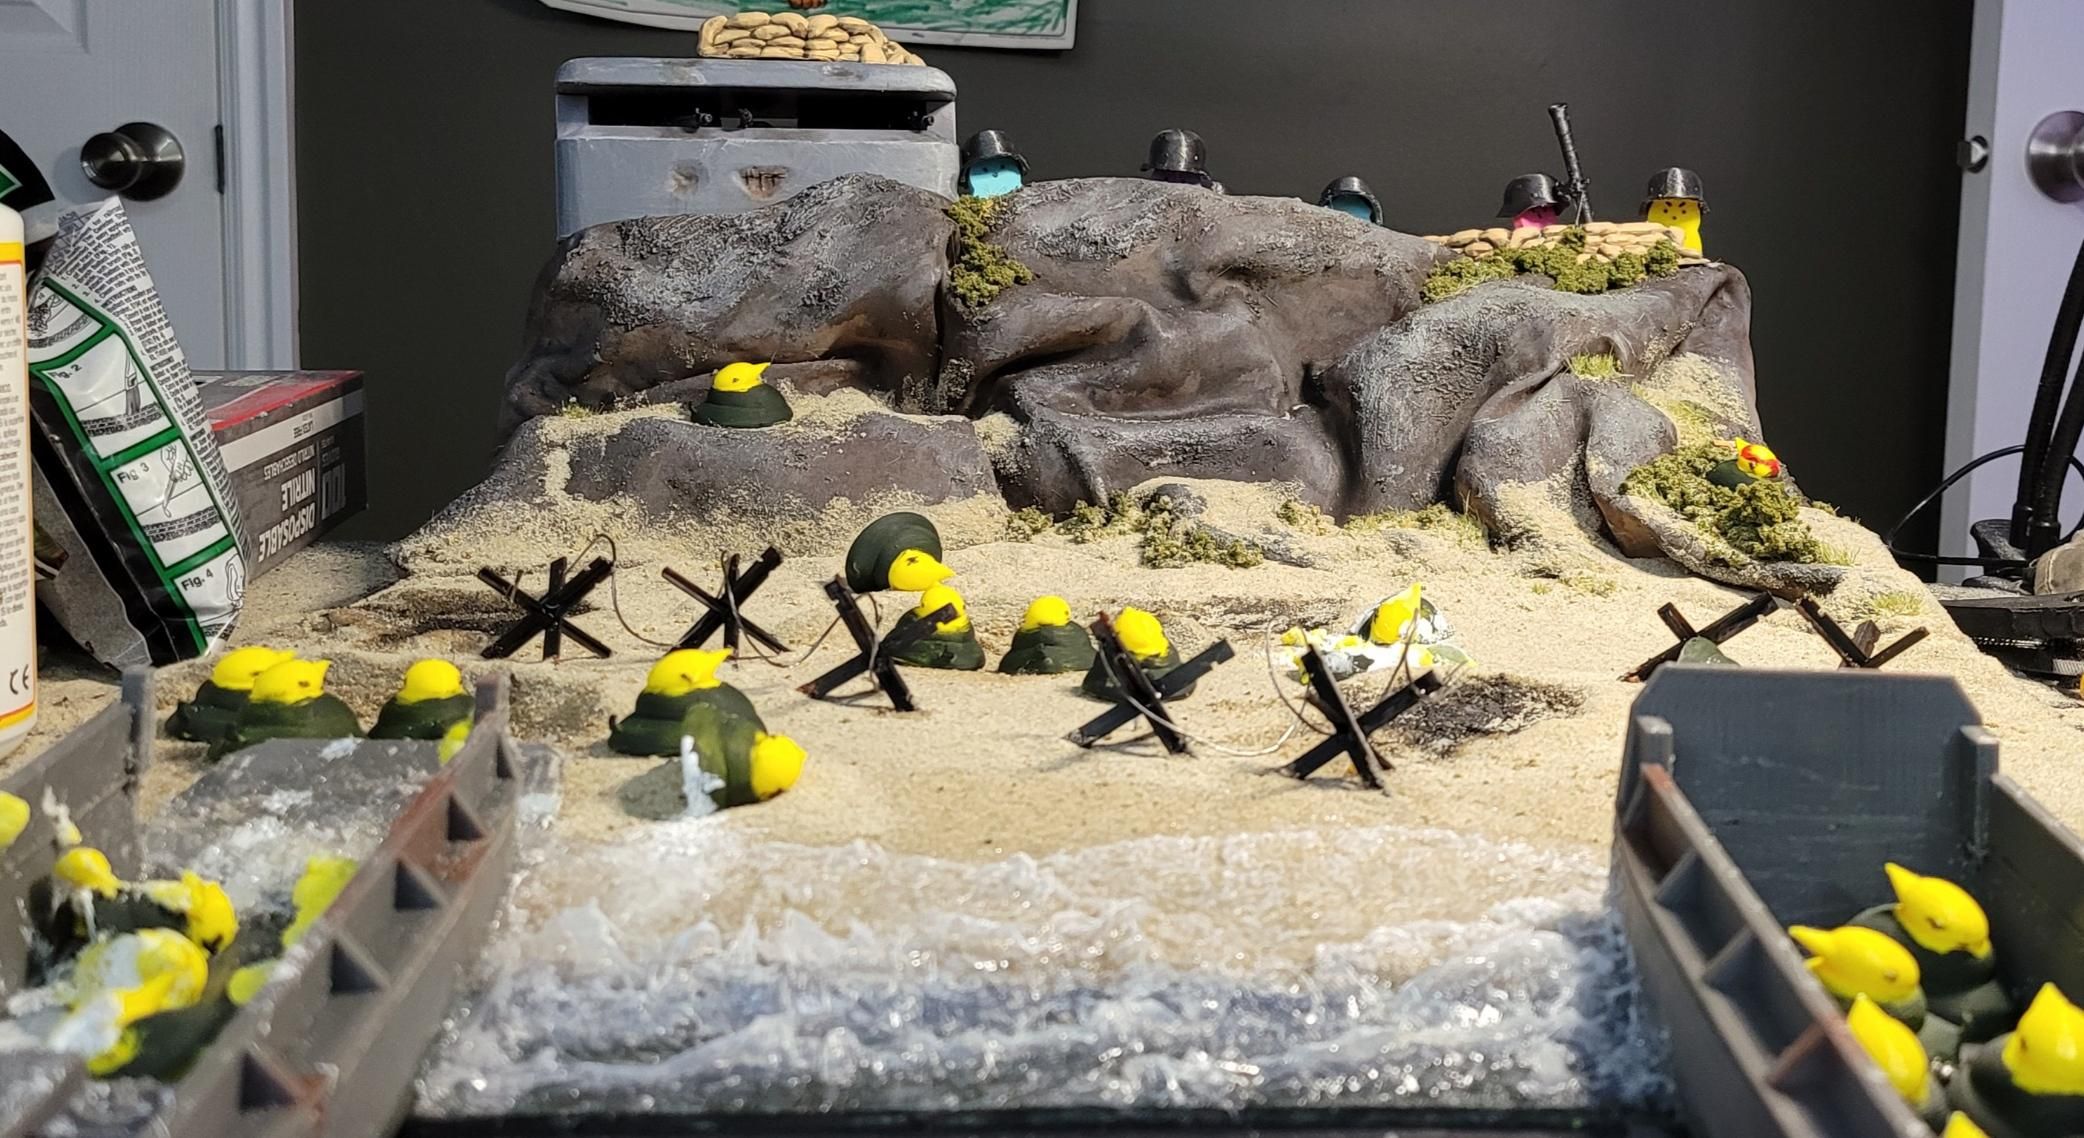 My Saving Private Ryan entry for a Peep diorama contest at my work...was met with mixed results.